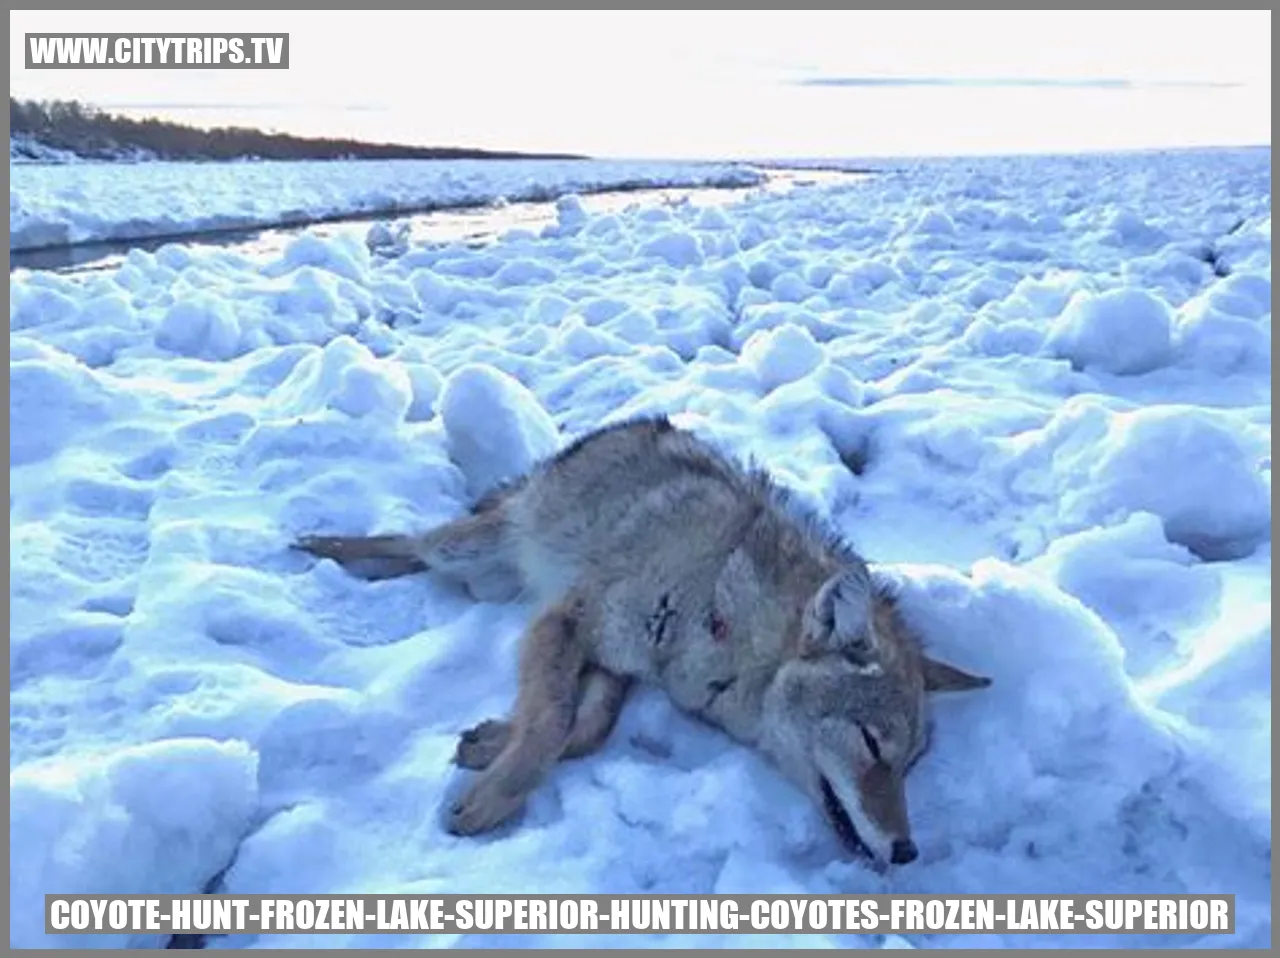 Preparing for a Winter Coyote Hunt on Lake Superior - Hunting Coyotes on the Frozen Lake